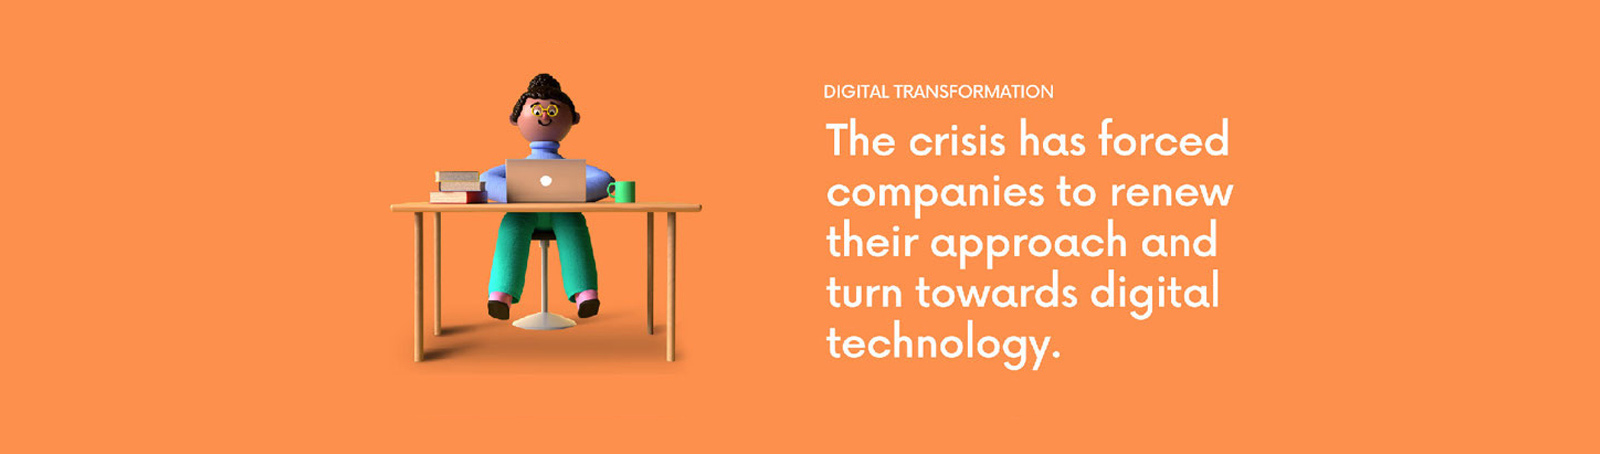 The crisis has forced companies to renew their approach and turn towards digital technology